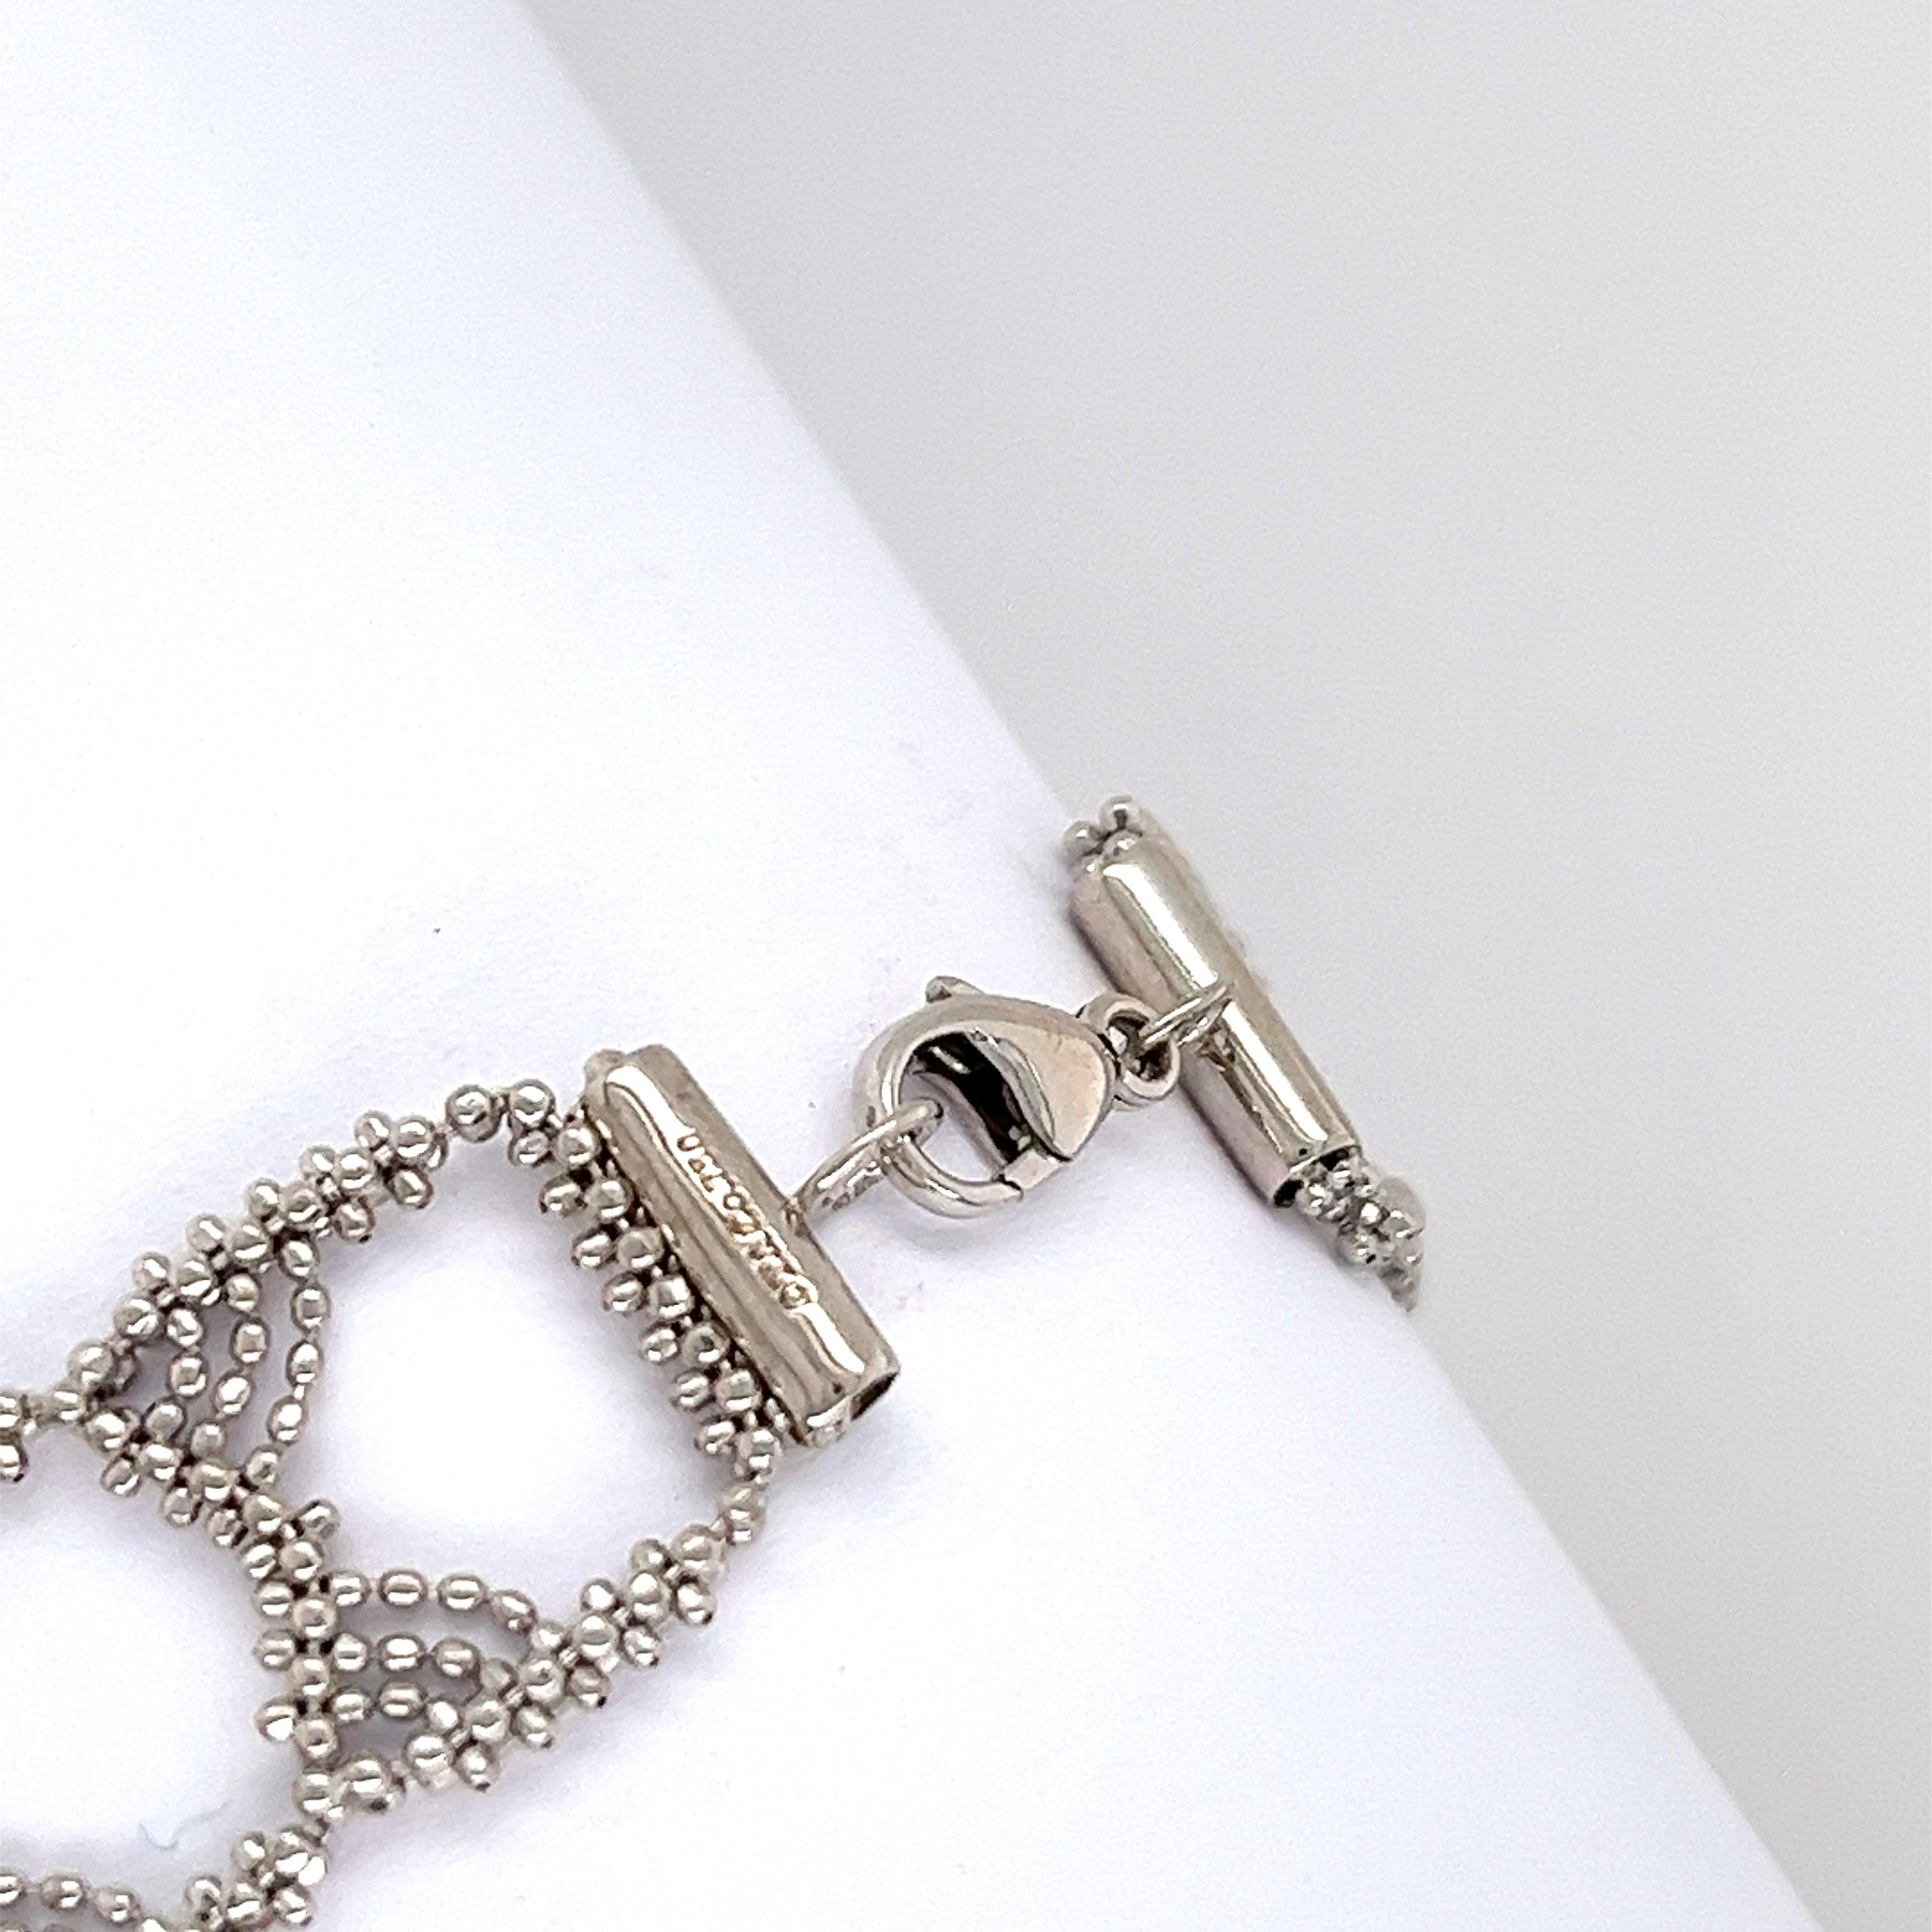 Adorn your wrist with this elegant bracelet from Tiffany & Co, showcasing a contemporary design set in 18ct white gold. Perfectly suited for day-to-night wear, its understated glamour is highlighted by the tasteful placement bead chain along the